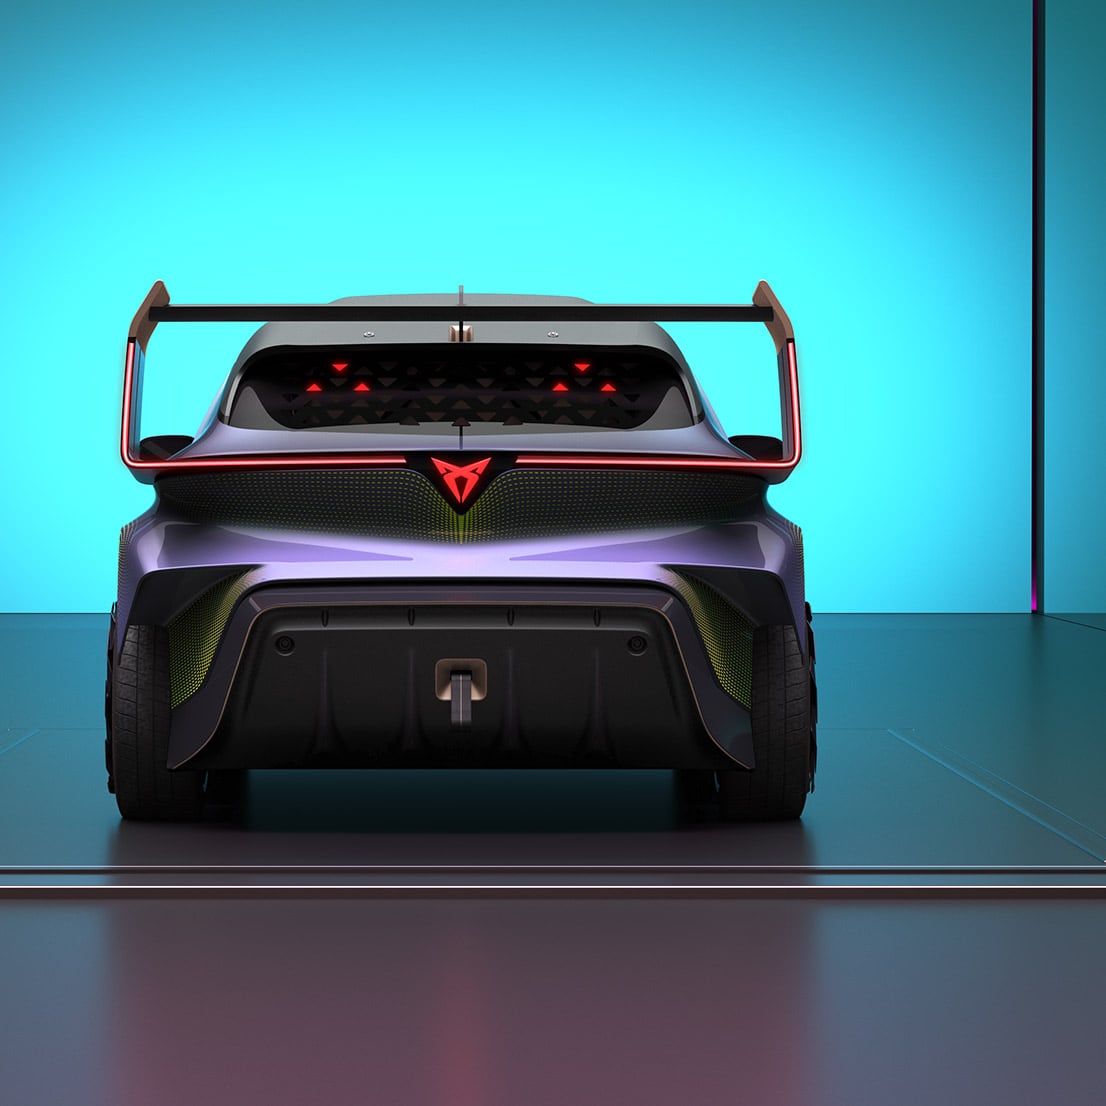 The CUPRA Raval, initially unveiled as UrbanRebel concept car rear view